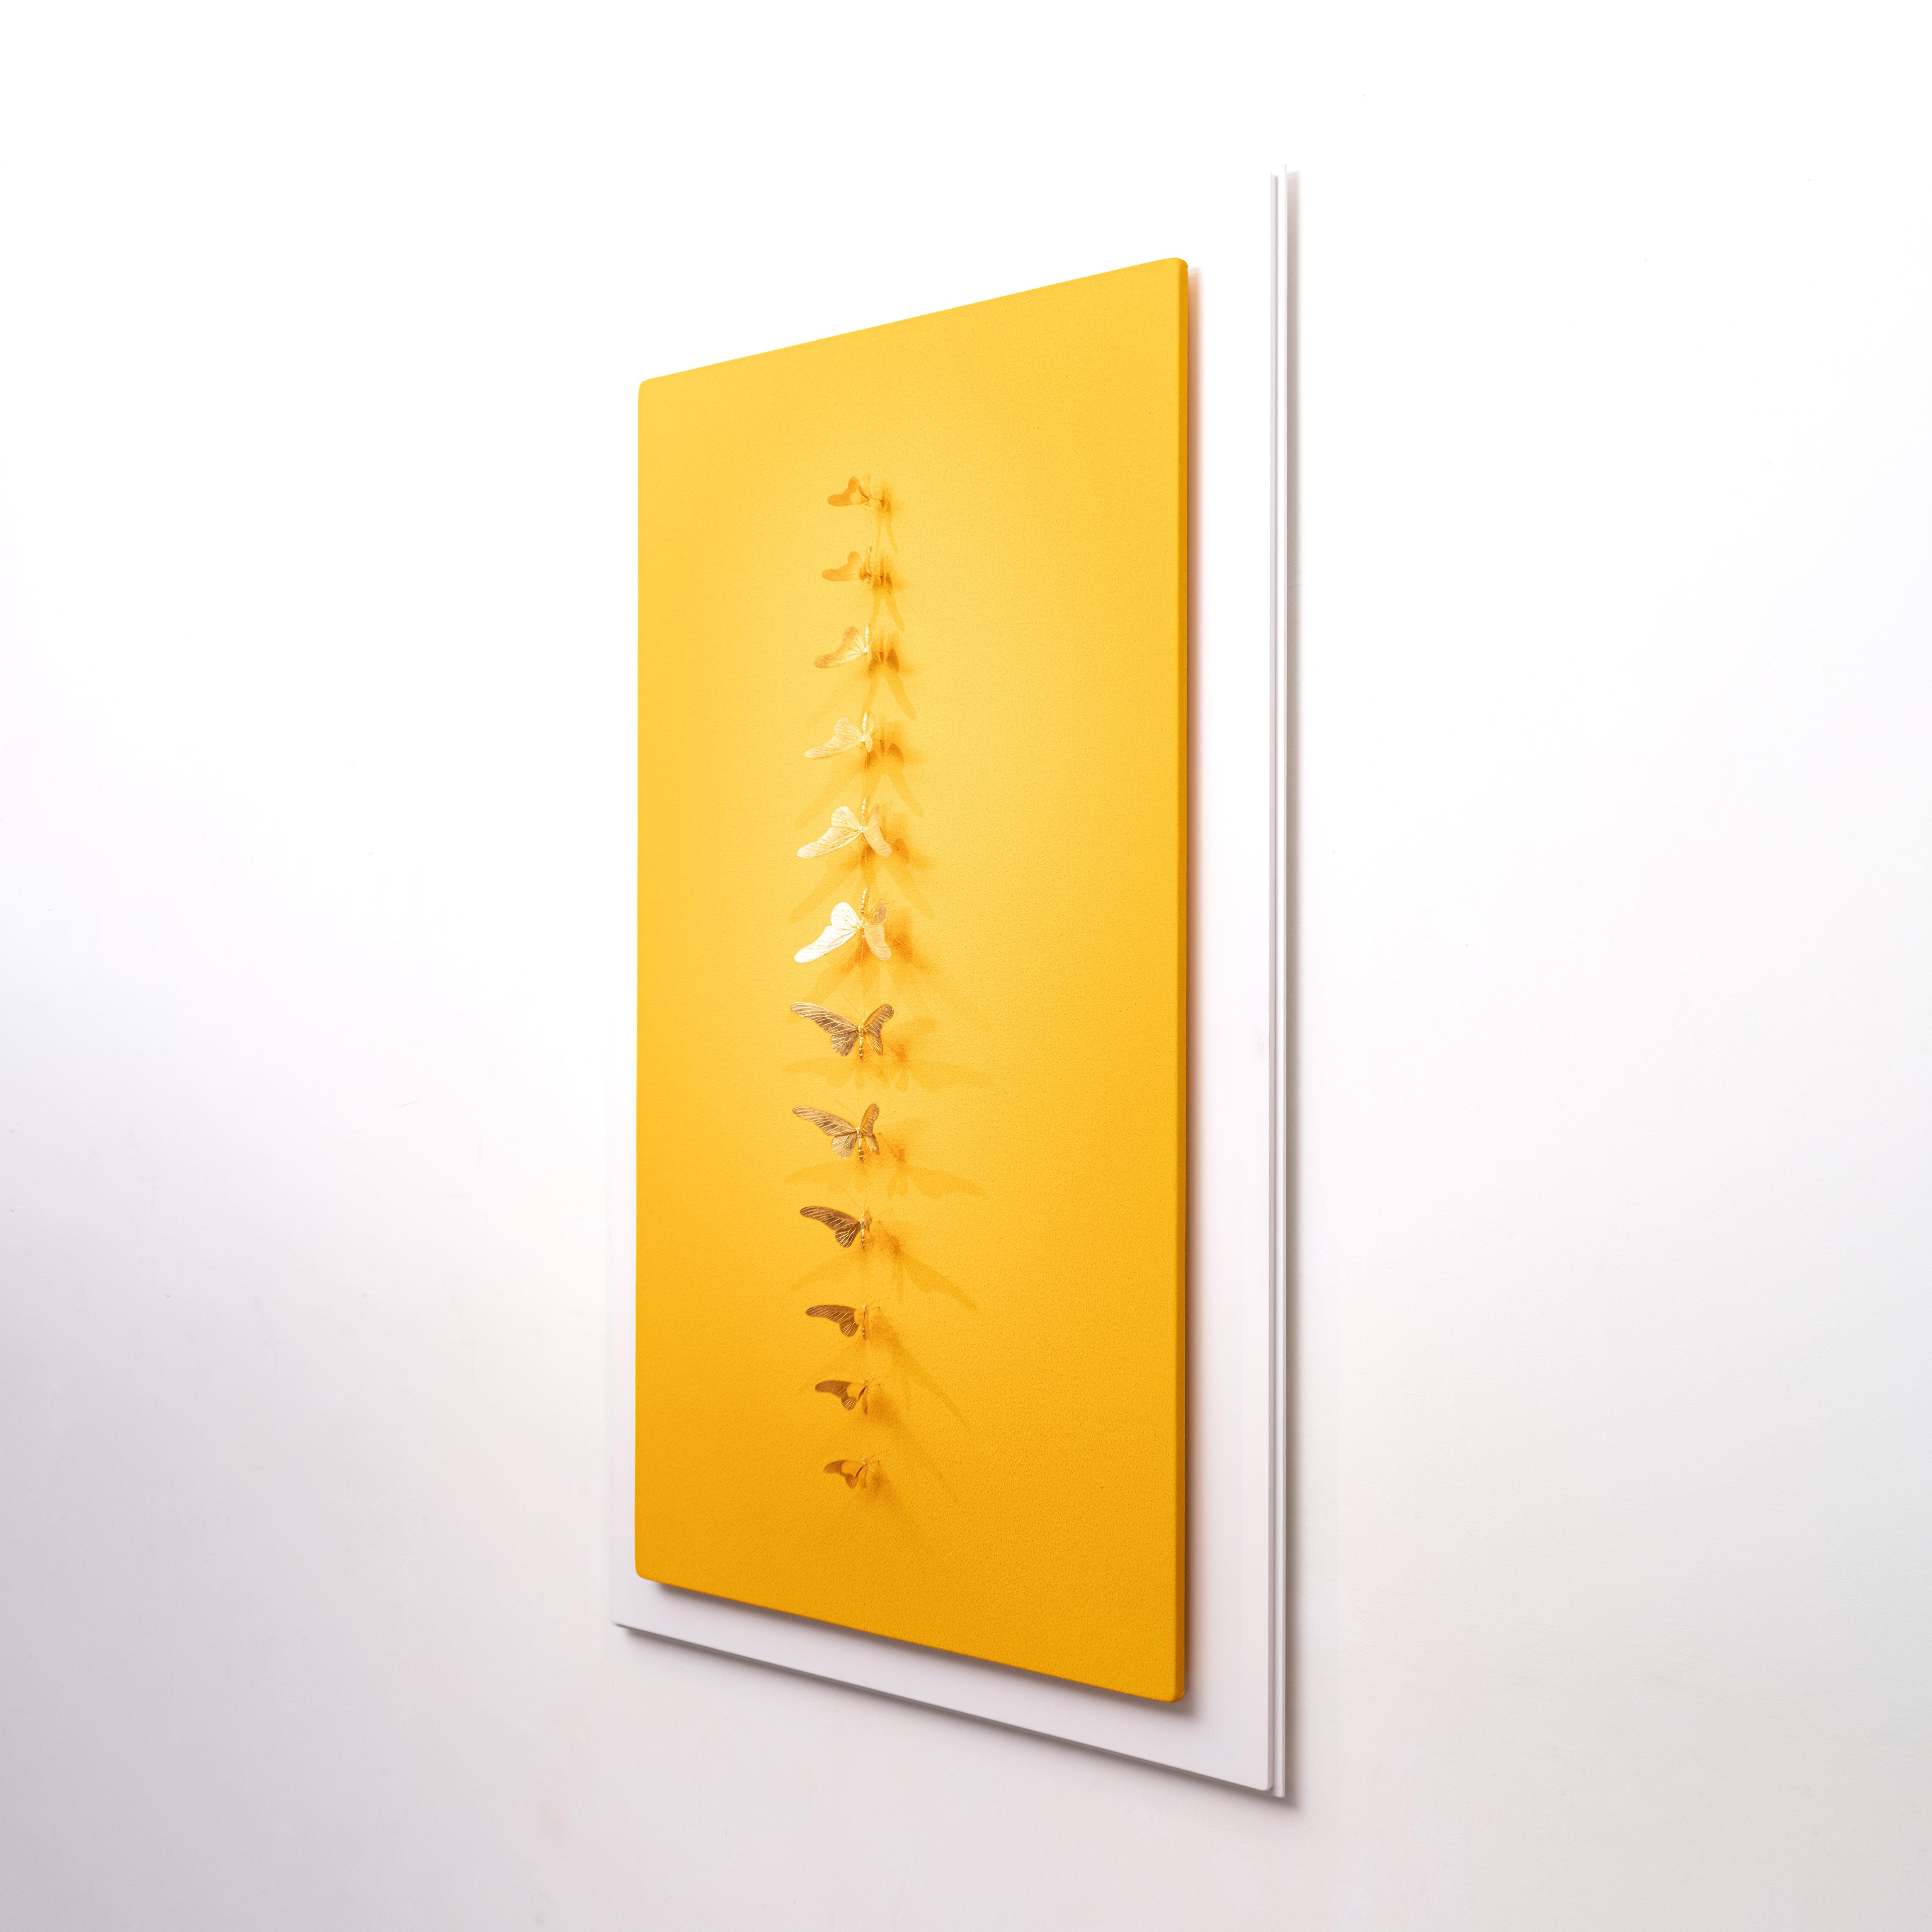 Metamorphosis Redux Yellow
Pigments and gold butterflies on canvas and wood.

As a self-taught artist with a medical background in surgery, bio-engineering and design, he stretches the limits of technical as well as aesthetic potential, applying the